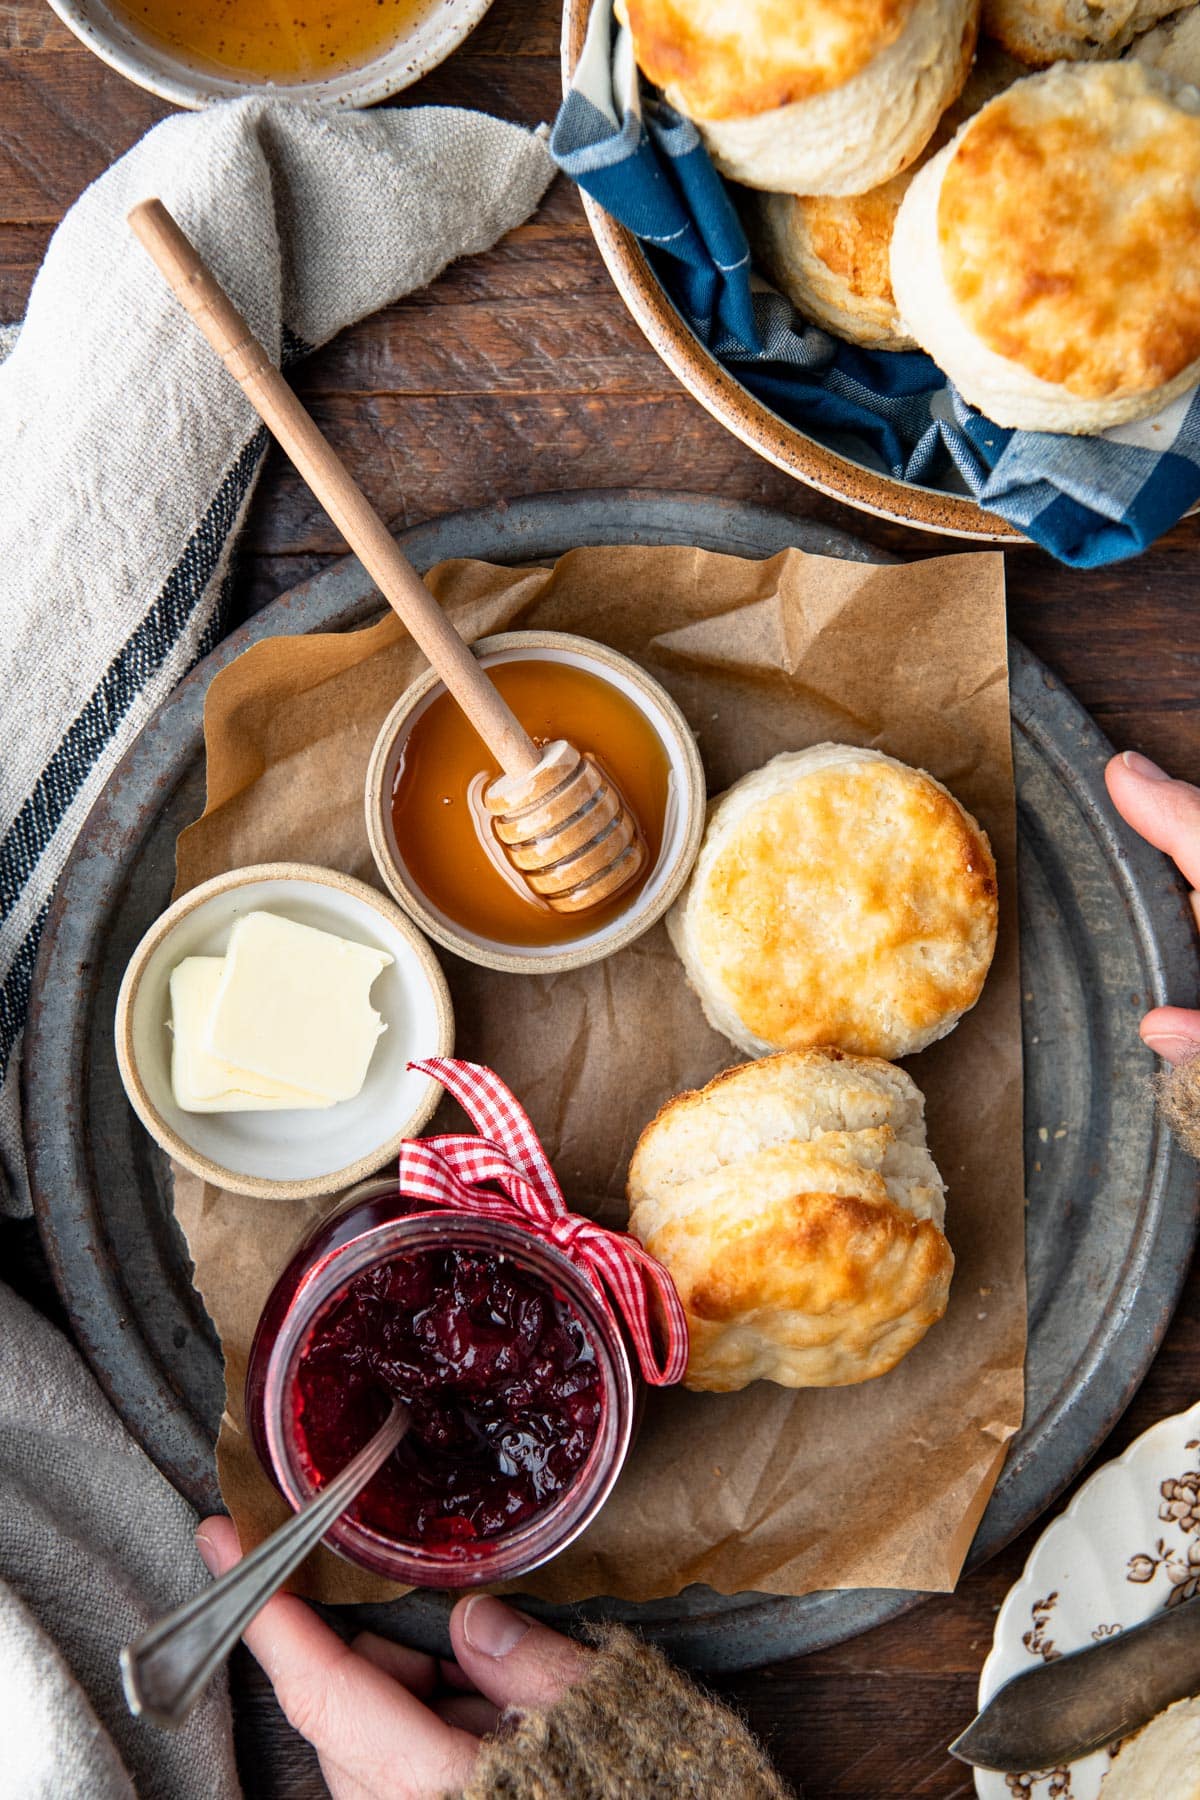 Hands holding a plate with two buttermilk biscuits and honey, butter, and jam.